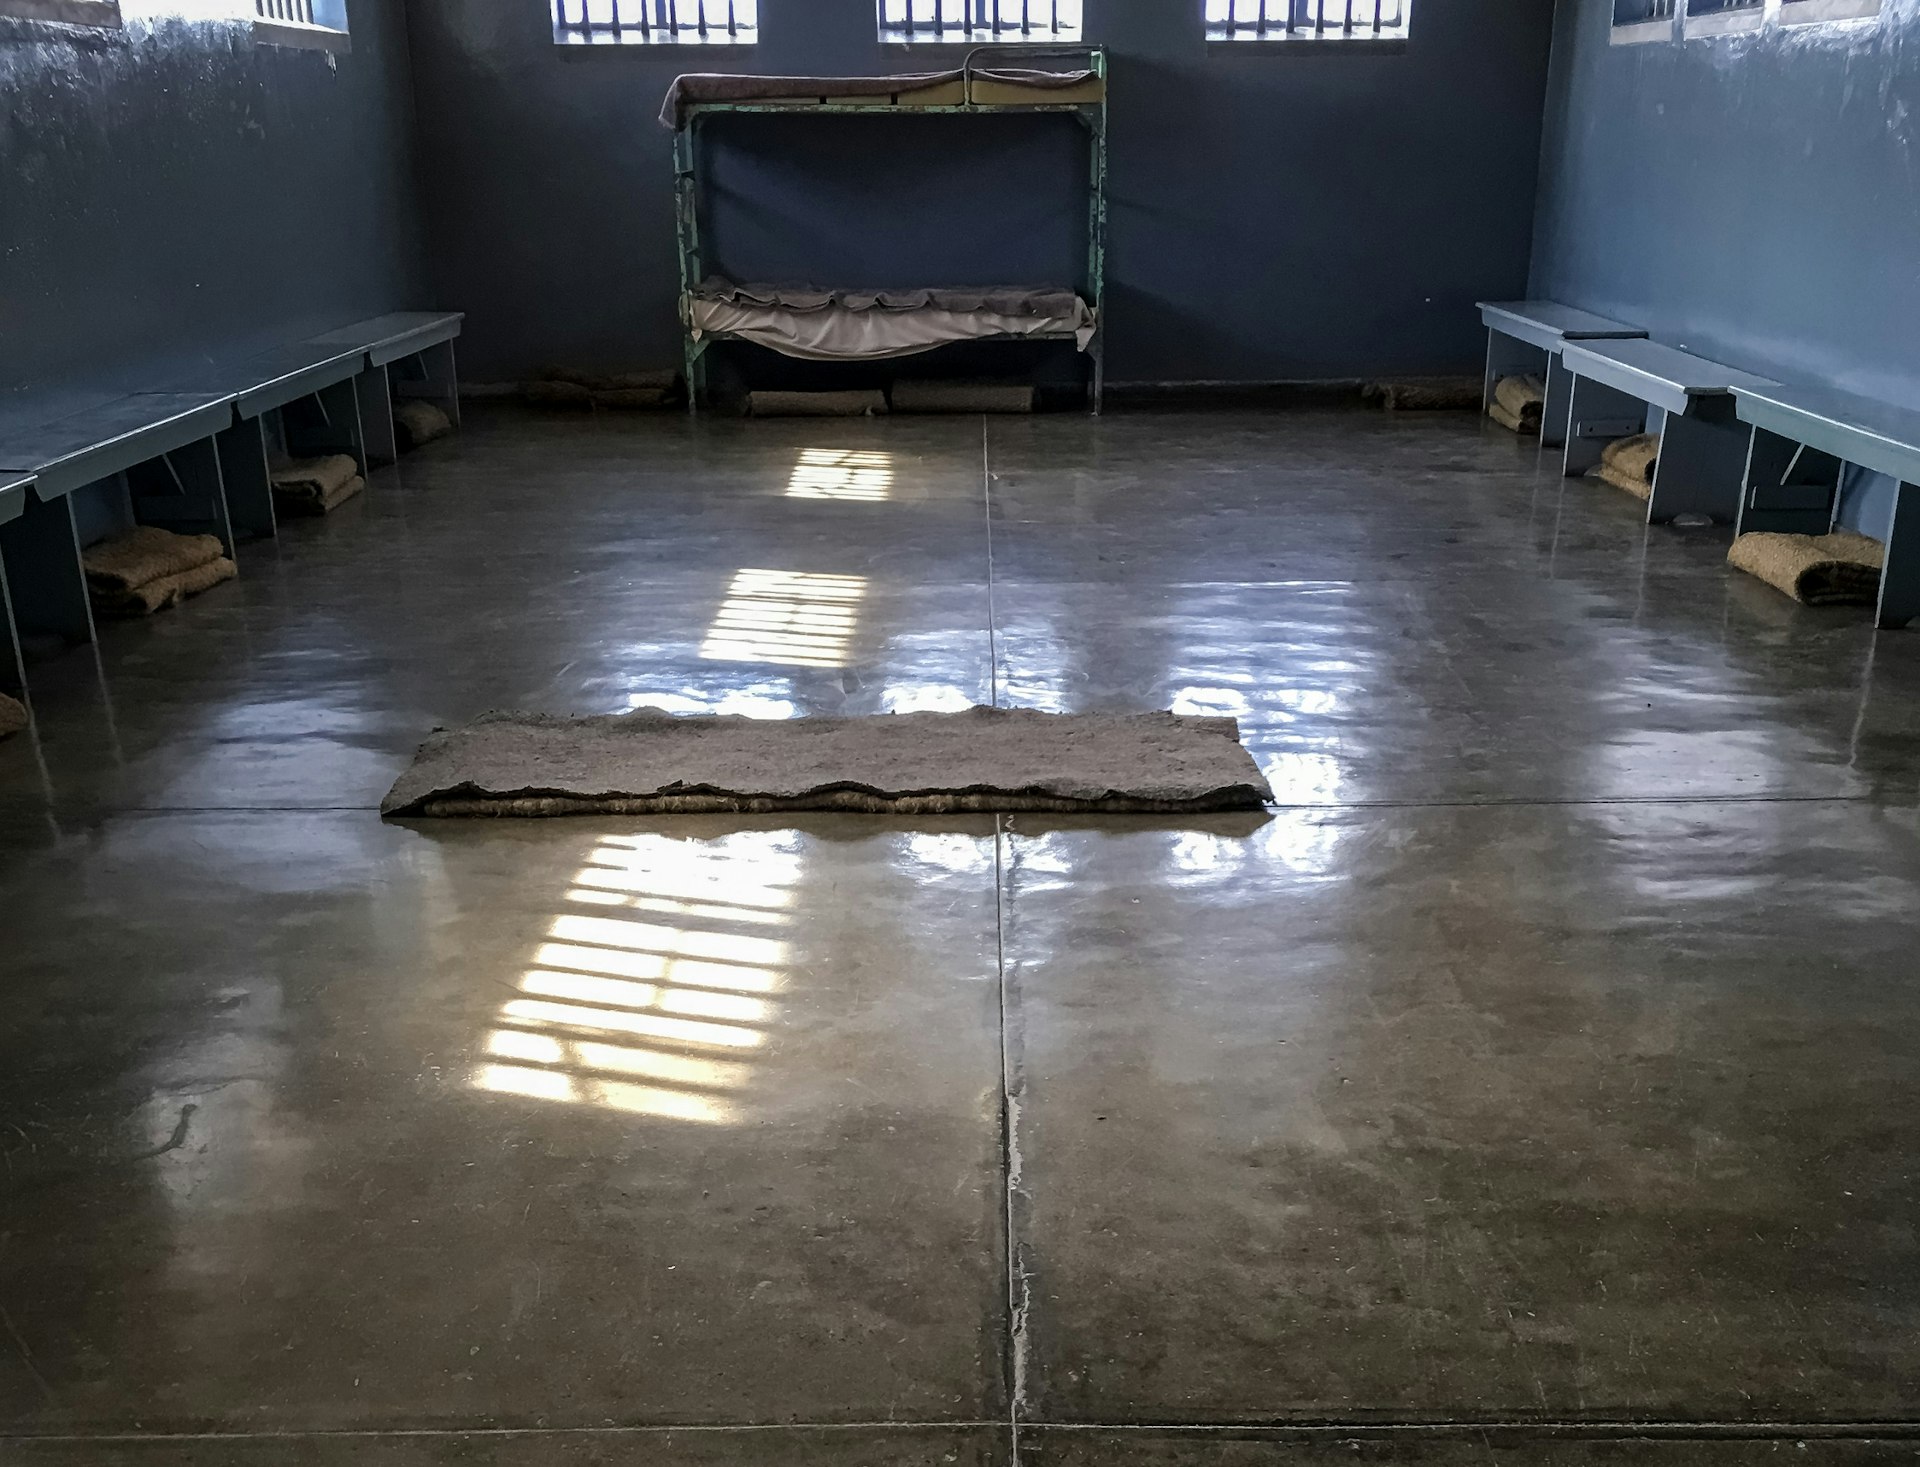 A sisal mat with rough blanket lay atop a polished concrete floor within a dark grey room with barred widows; benches line the walls and a single bunk bed sits at the far end.